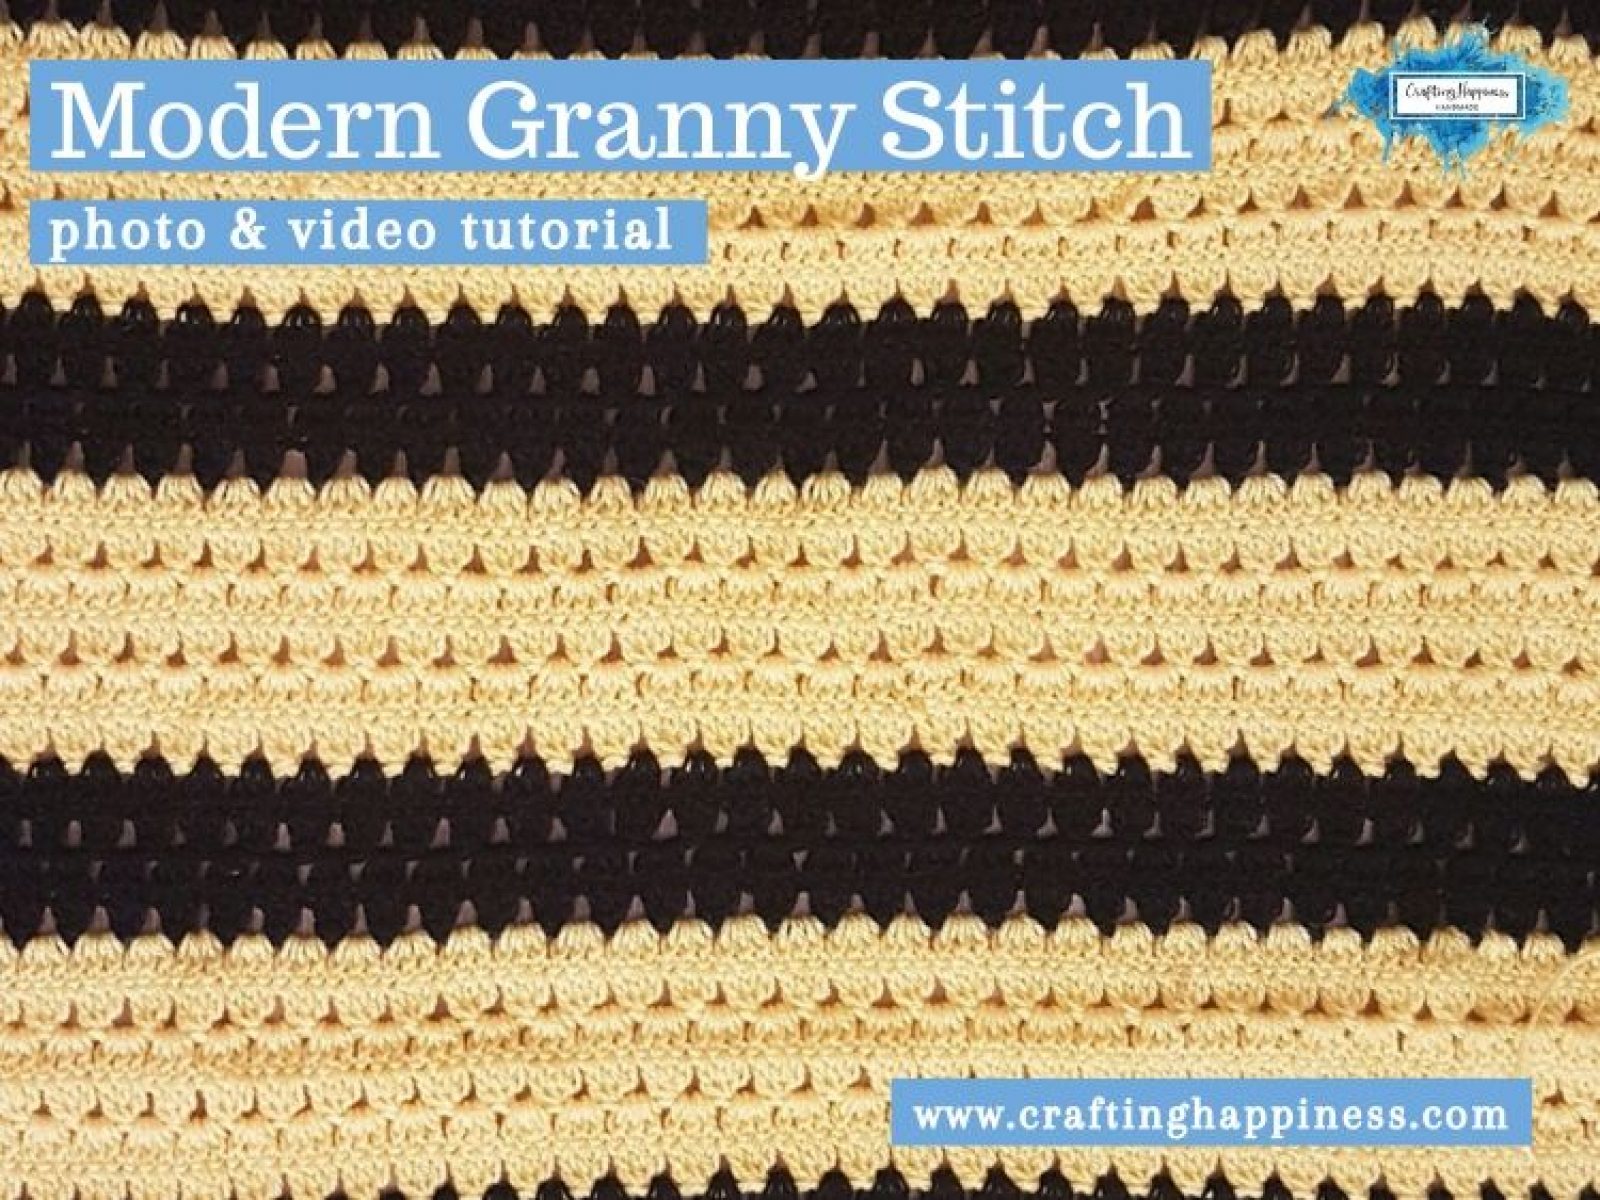 Modern Granny Stitch by Crafting Happiness FACEBOOK POSTER